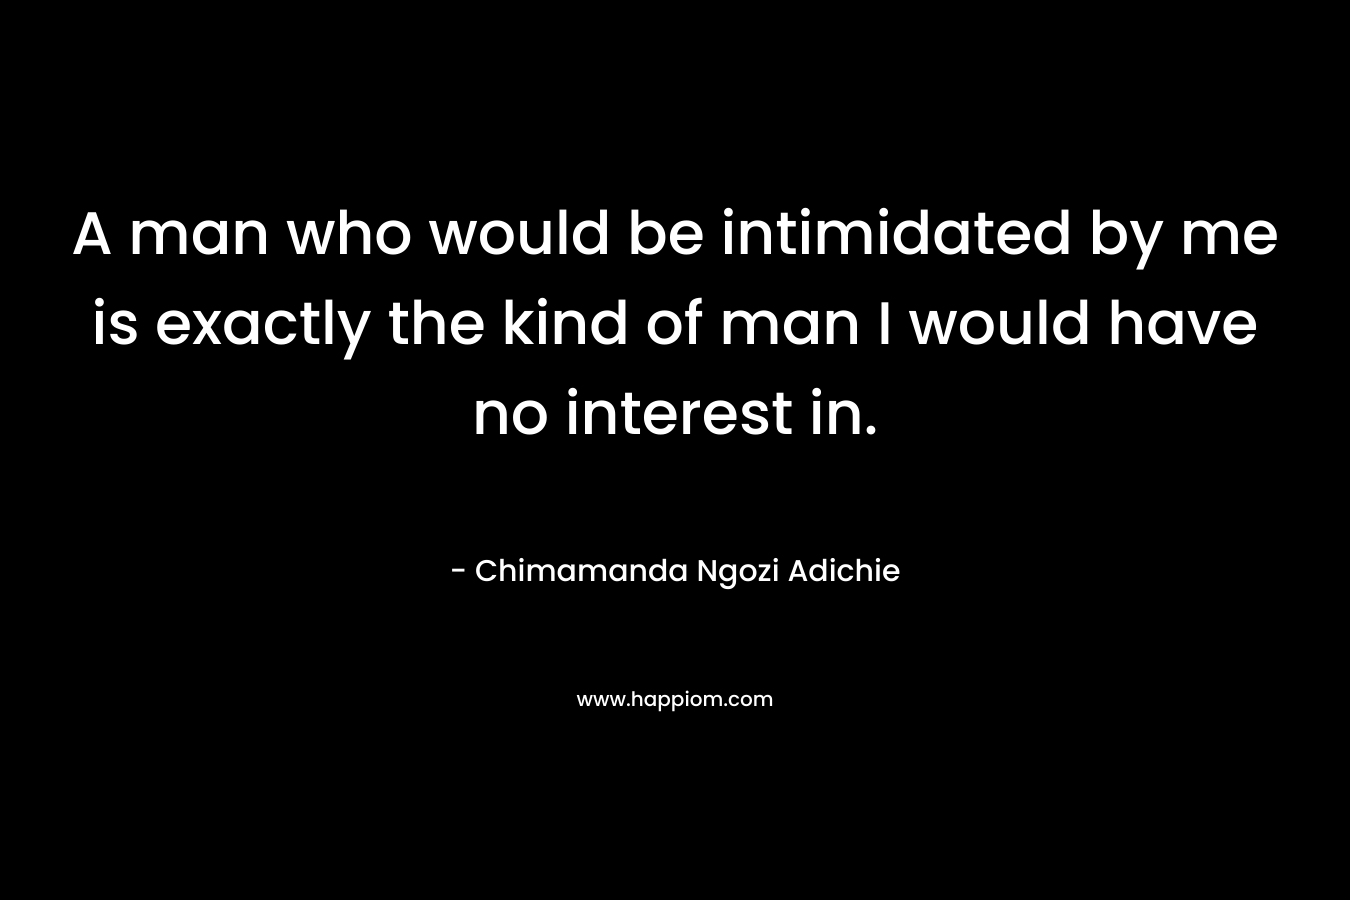 A man who would be intimidated by me is exactly the kind of man I would have no interest in.